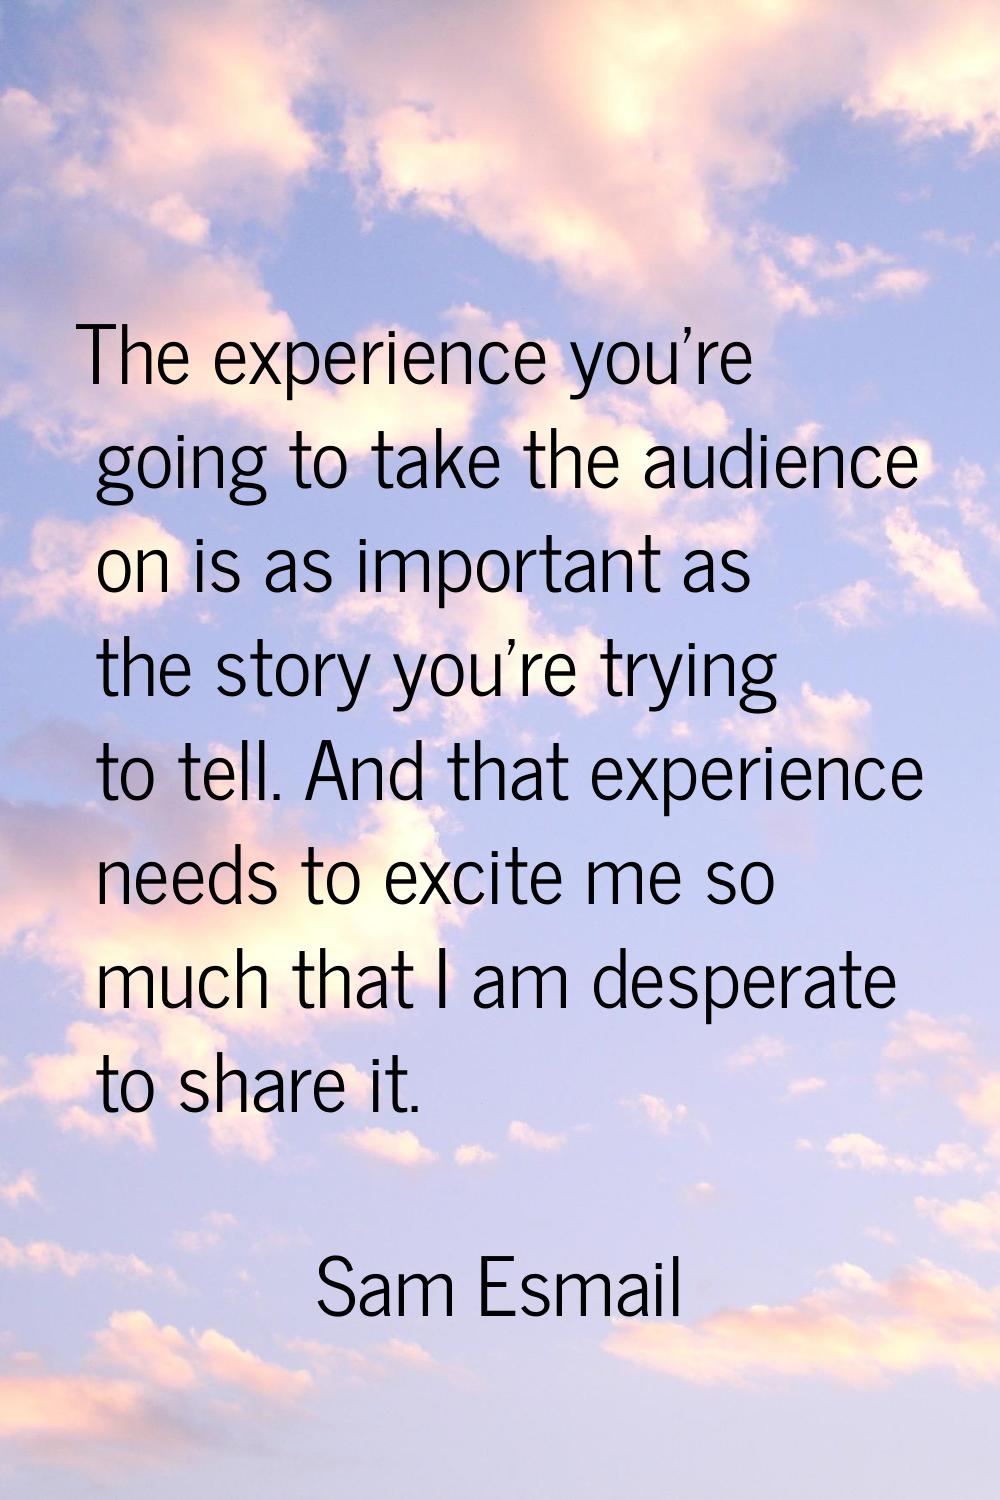 The experience you're going to take the audience on is as important as the story you're trying to t